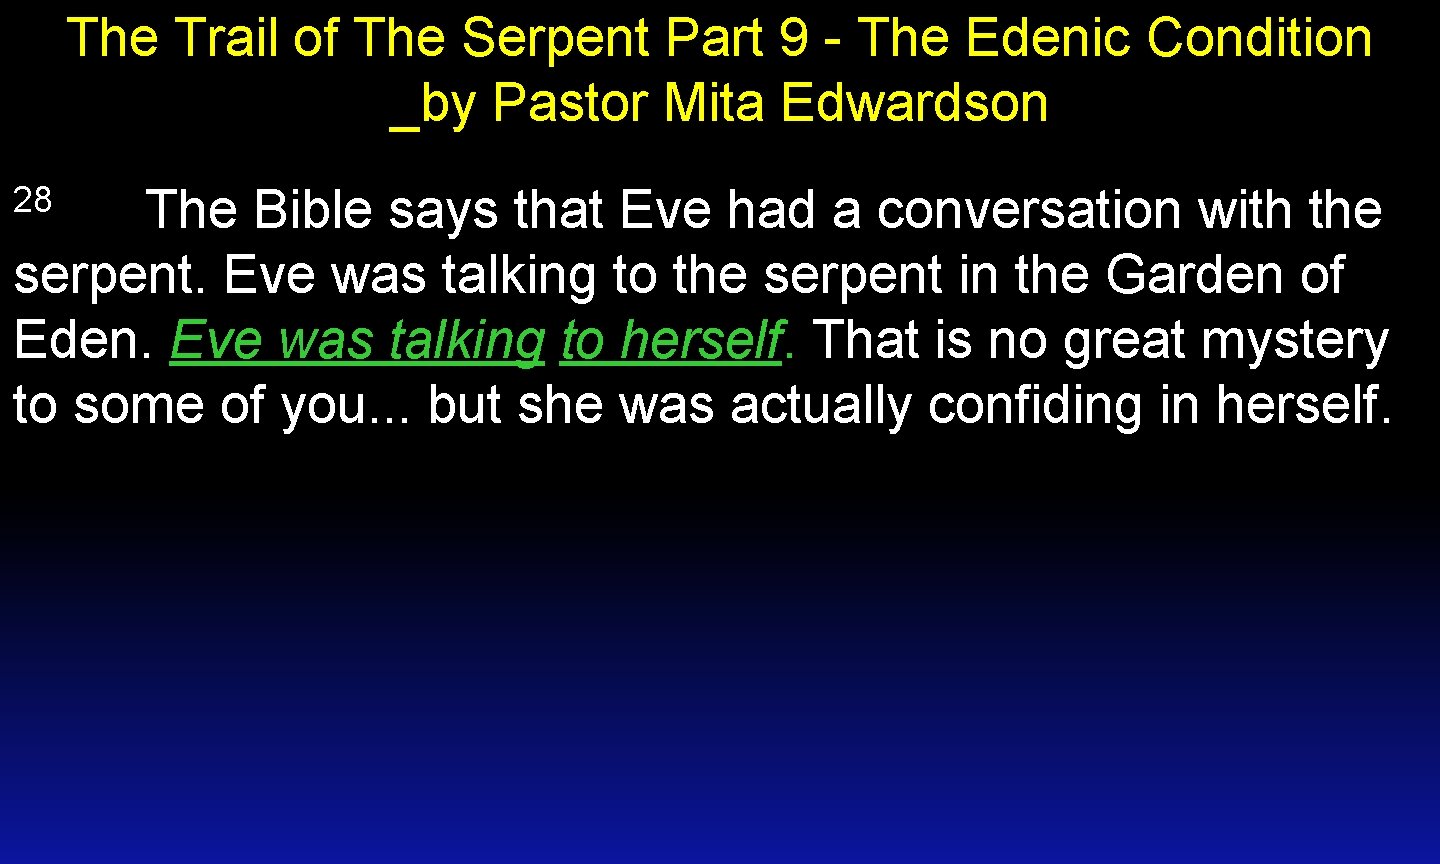 The Trail of The Serpent Part 9 - The Edenic Condition _by Pastor Mita